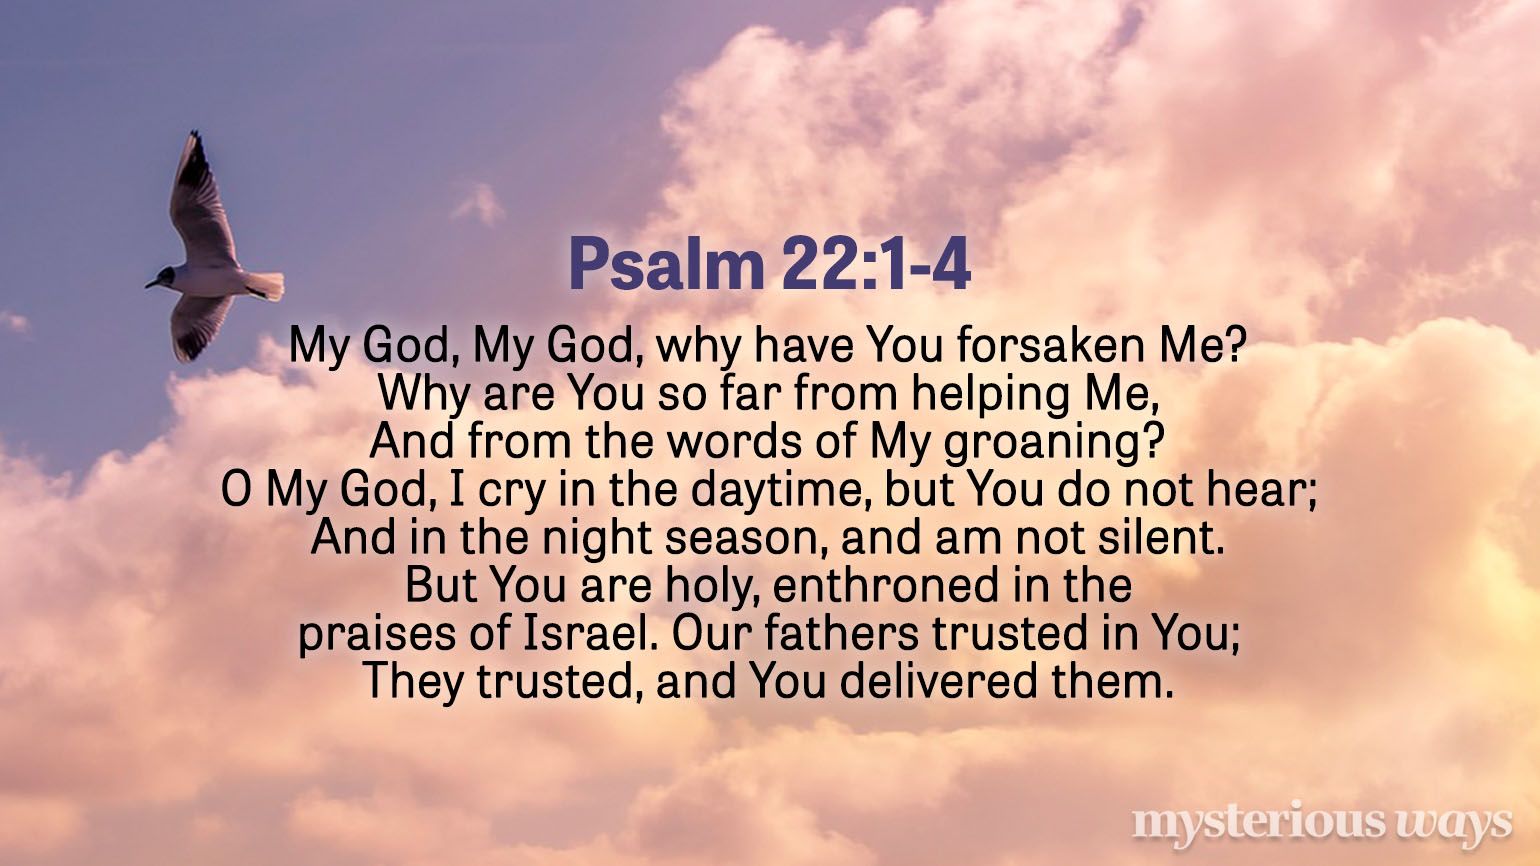 Psalm 22:1-4 “My God, My God, why have You forsaken Me? Why are You so far from helping Me, And from the words of My groaning? O My God, I cry in the daytime, but You do not hear; And in the night season, and am not silent.  But You are holy, Enthroned in the praises of Israel. Our fathers trusted in You; They trusted, and You delivered them.”